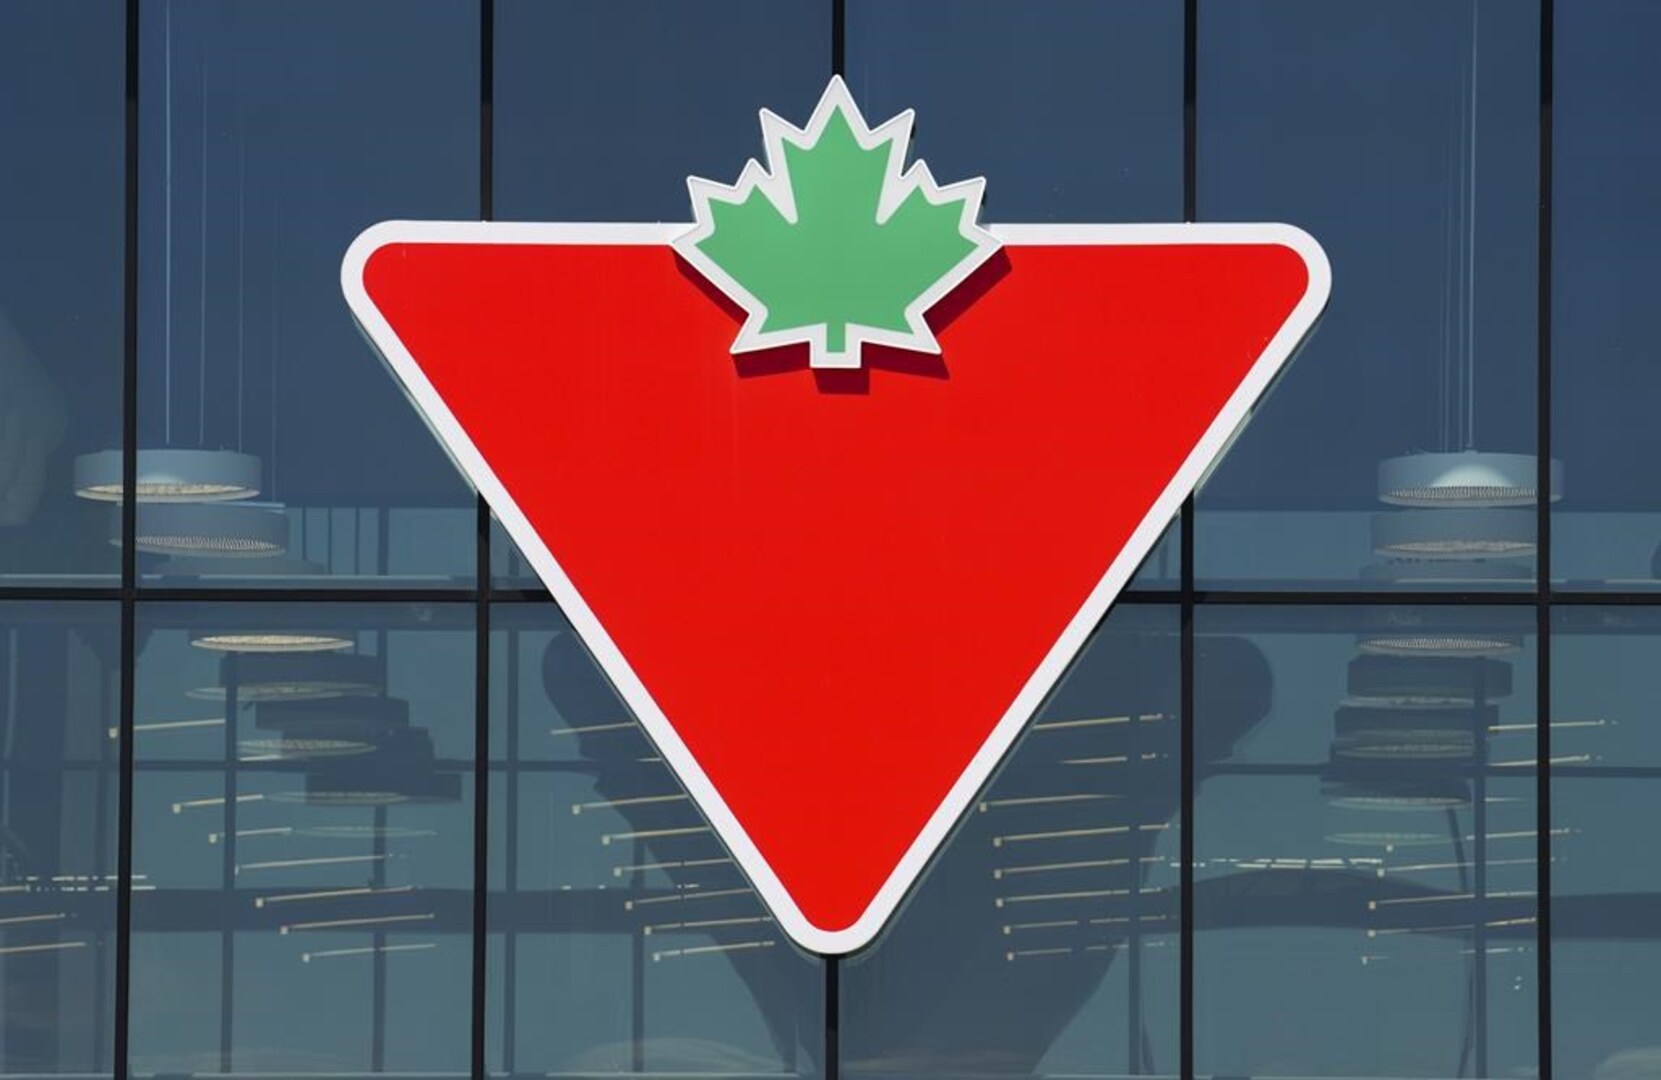 Business Report: Tough winter season for Canadian Tire